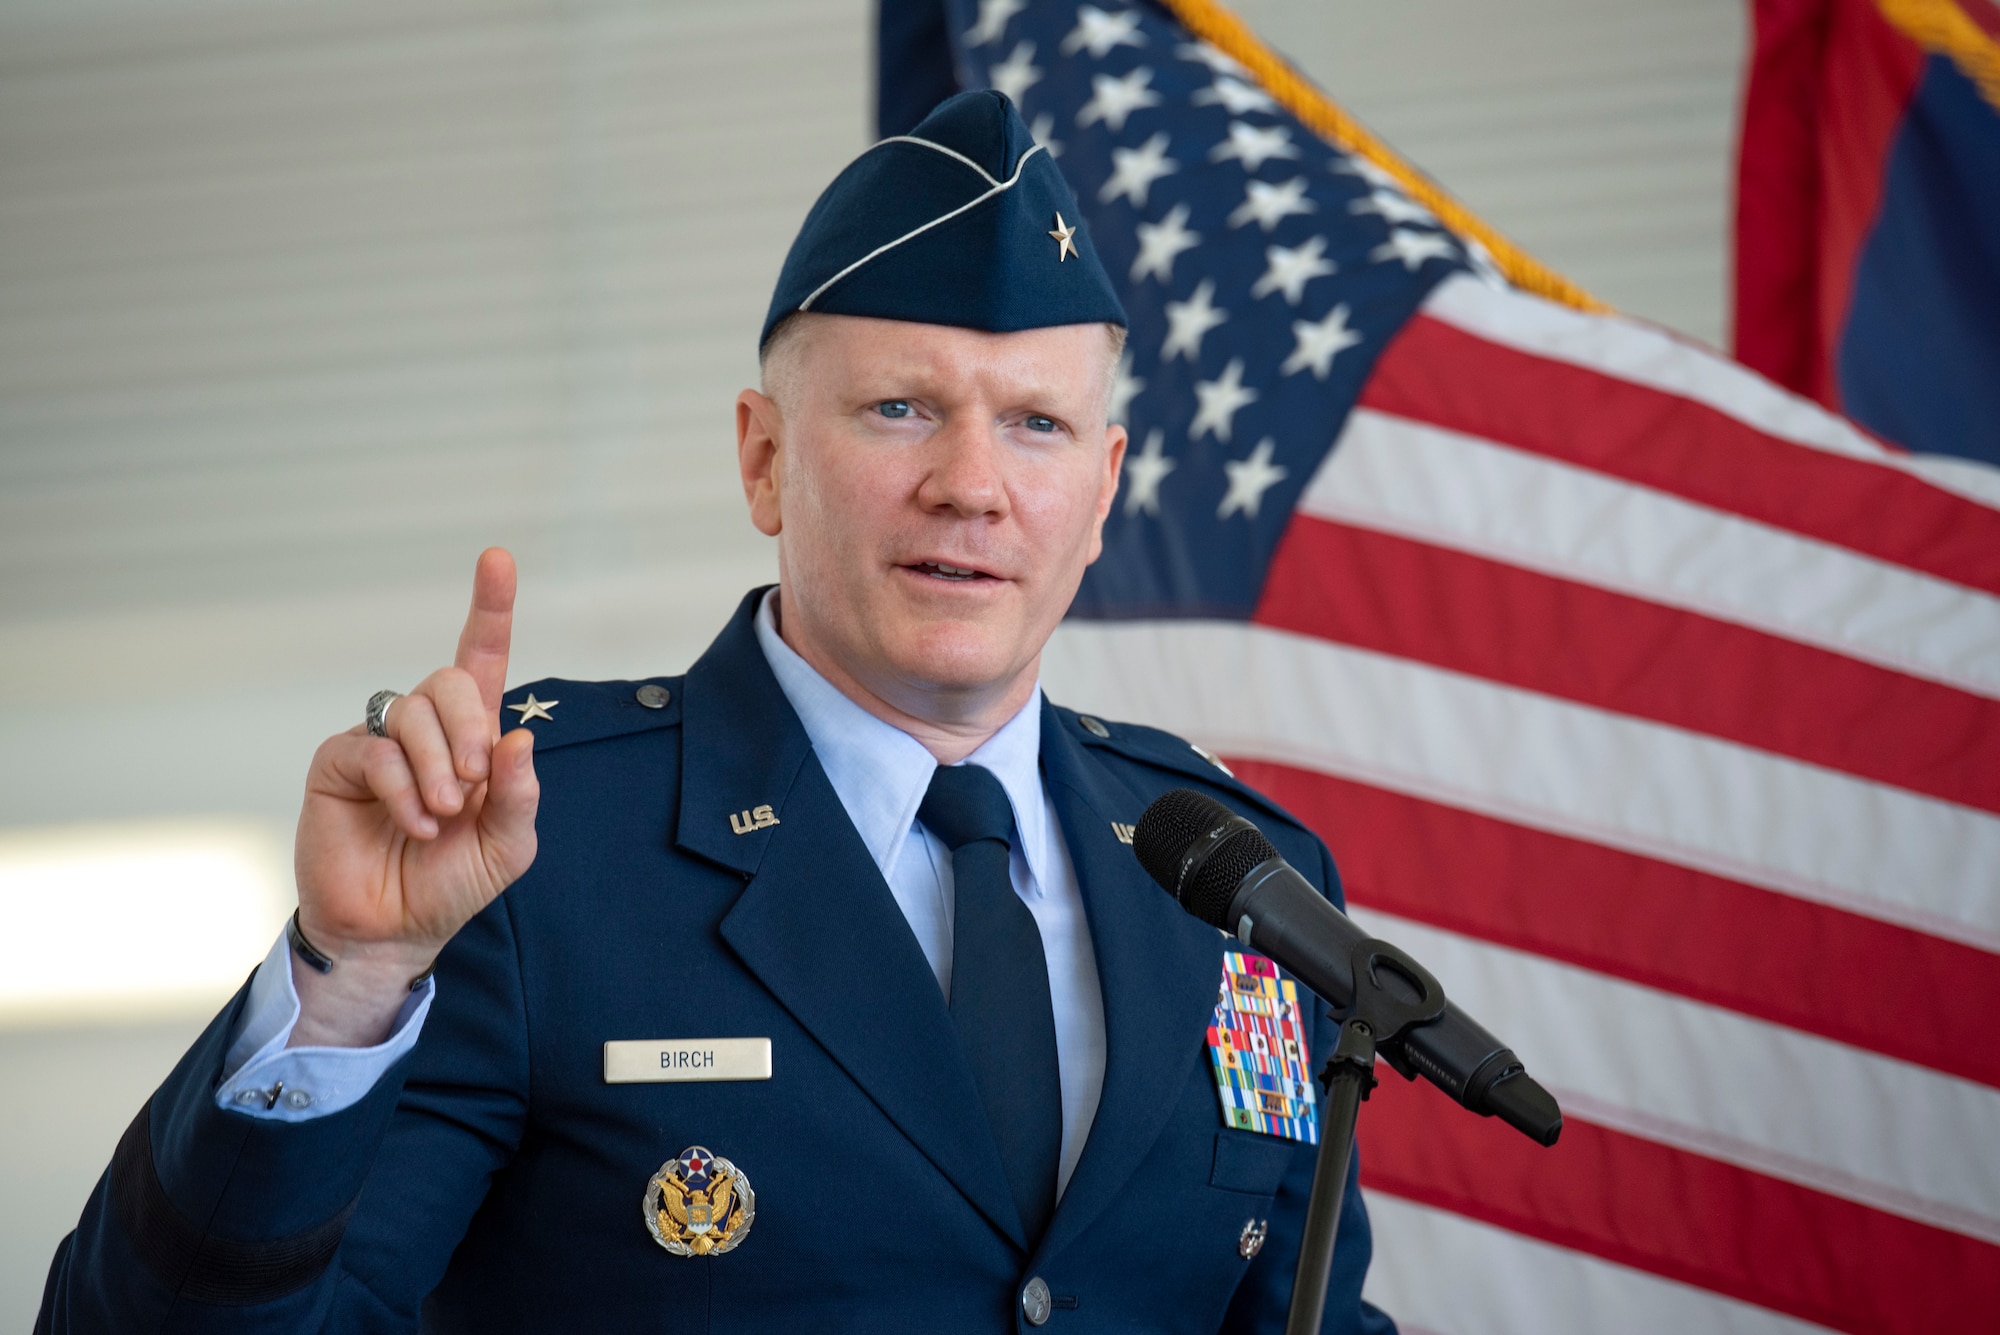 U.S. Air Force Brig. Gen. Paul R. Birch offers remarks during the 36th Wing change of command ceremony, June 10, 2022, at Andersen Air Force Base, Guam. As installation commander, Birch is now responsible for the well-being of more than 8,000 joint military and civilian personnel on Andersen AFB. Additionally, he supports Department of Defense installation management of Guam and the Northern Mariana Islands as the Deputy Commander of Joint Region Marianas. (U.S. Air Force photo by Staff Sgt. Ryan Brooks)